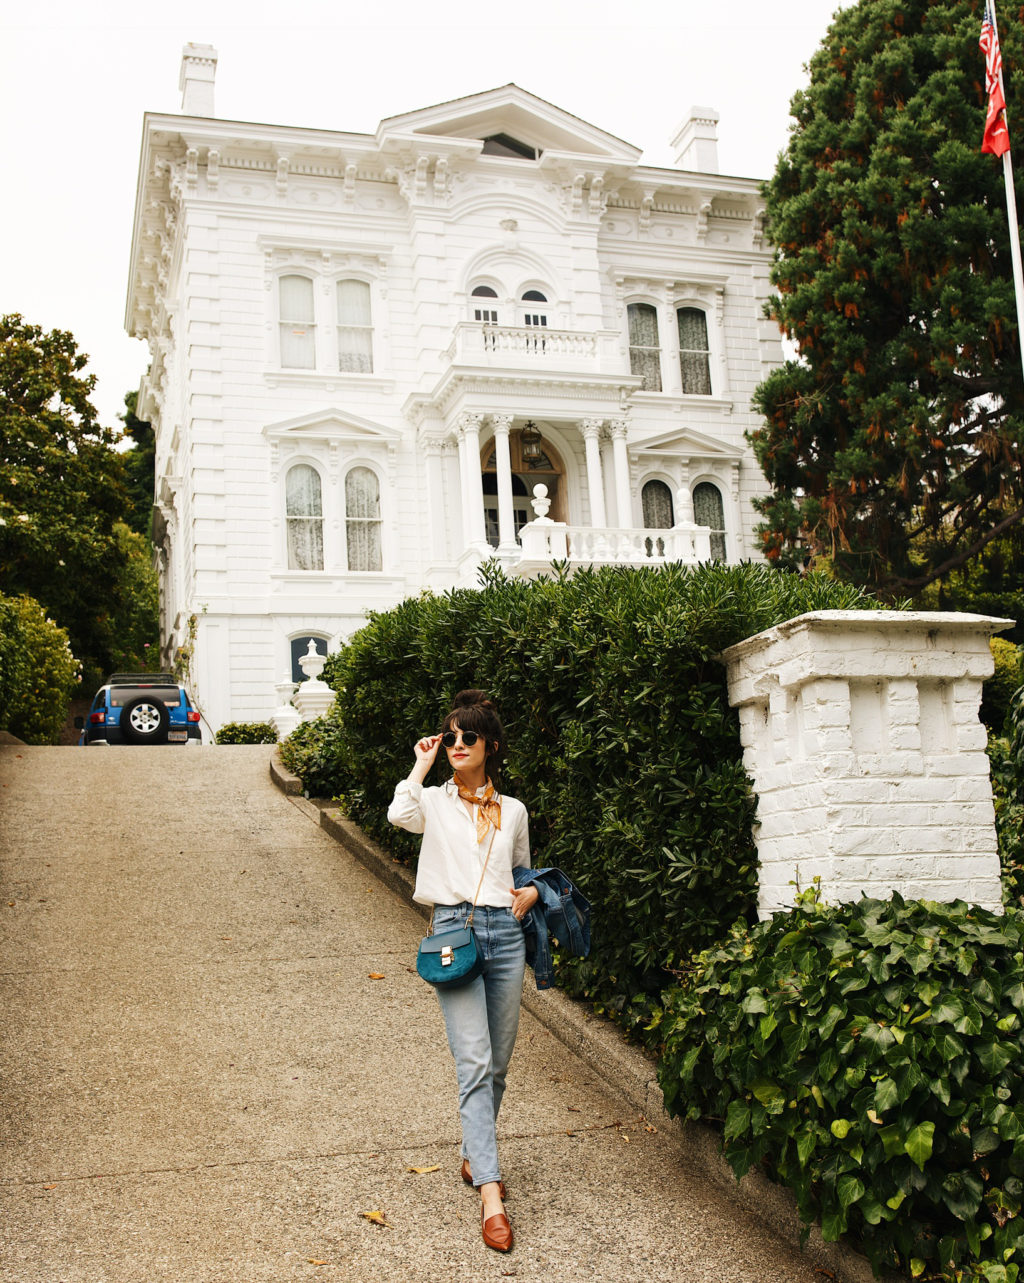 San Francisco Victorian Home Tour - New Darlings Travel Lifestyle Blog